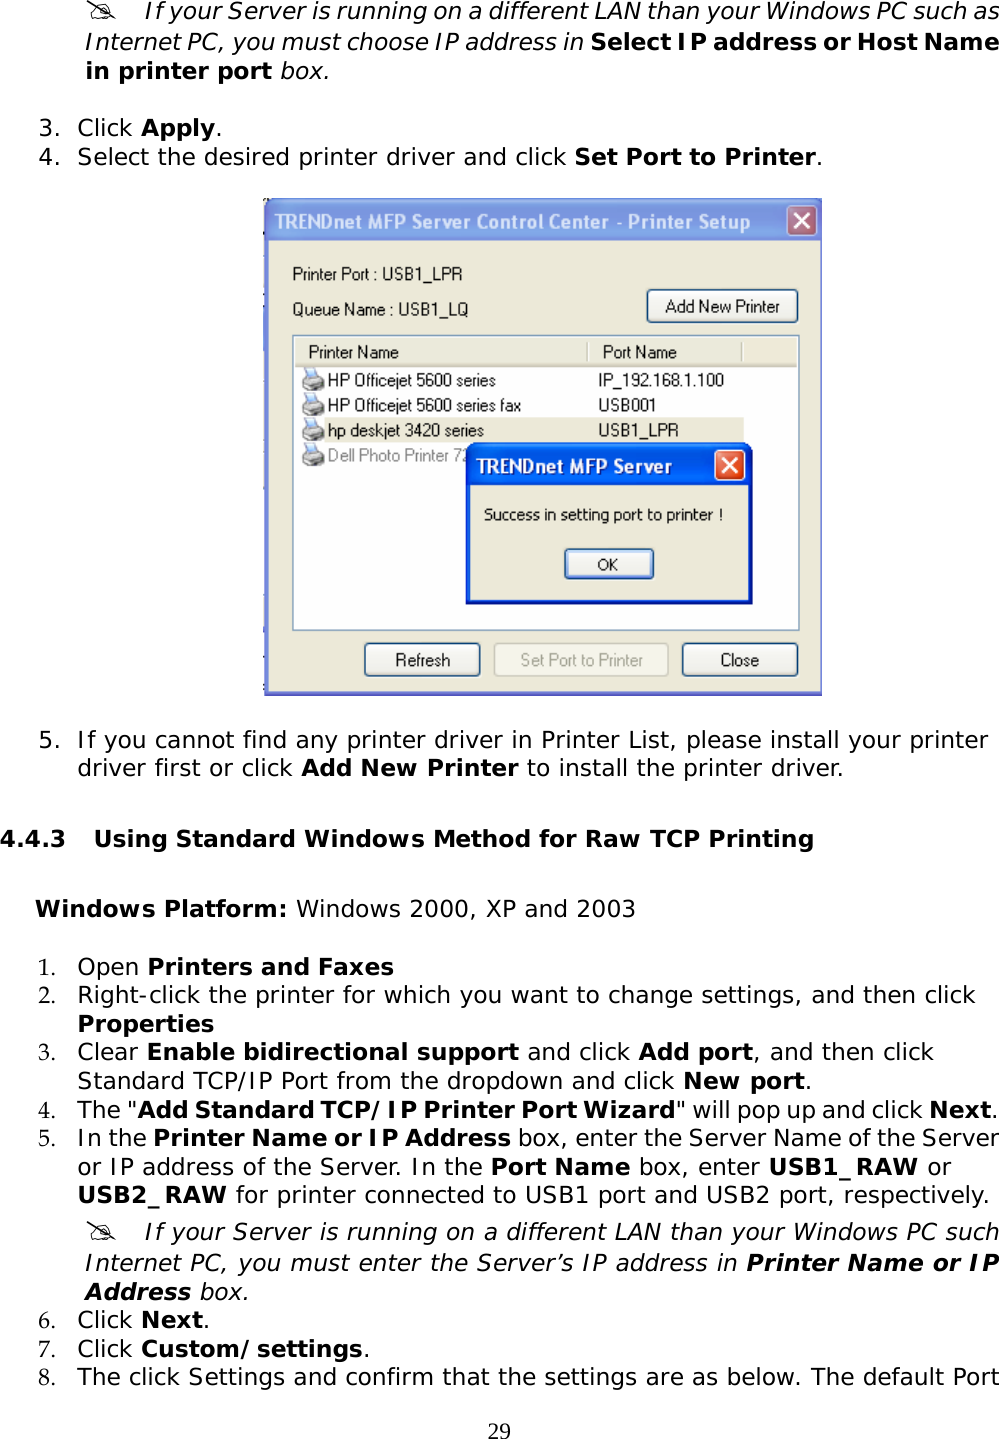     29#  If your Server is running on a different LAN than your Windows PC such as Internet PC, you must choose IP address in Select IP address or Host Name in printer port box.  3. Click Apply. 4. Select the desired printer driver and click Set Port to Printer.     5. If you cannot find any printer driver in Printer List, please install your printer driver first or click Add New Printer to install the printer driver.  4.4.3 Using Standard Windows Method for Raw TCP Printing  Windows Platform: Windows 2000, XP and 2003 1. Open Printers and Faxes  2. Right-click the printer for which you want to change settings, and then click Properties 3. Clear Enable bidirectional support and click Add port, and then click Standard TCP/IP Port from the dropdown and click New port. 4. The &quot;Add Standard TCP/IP Printer Port Wizard&quot; will pop up and click Next. 5. In the Printer Name or IP Address box, enter the Server Name of the Server or IP address of the Server. In the Port Name box, enter USB1_RAW or USB2_RAW for printer connected to USB1 port and USB2 port, respectively.  #  If your Server is running on a different LAN than your Windows PC such Internet PC, you must enter the Server’s IP address in Printer Name or IP Address box. 6. Click Next.     7. Click Custom/settings. 8. The click Settings and confirm that the settings are as below. The default Port 